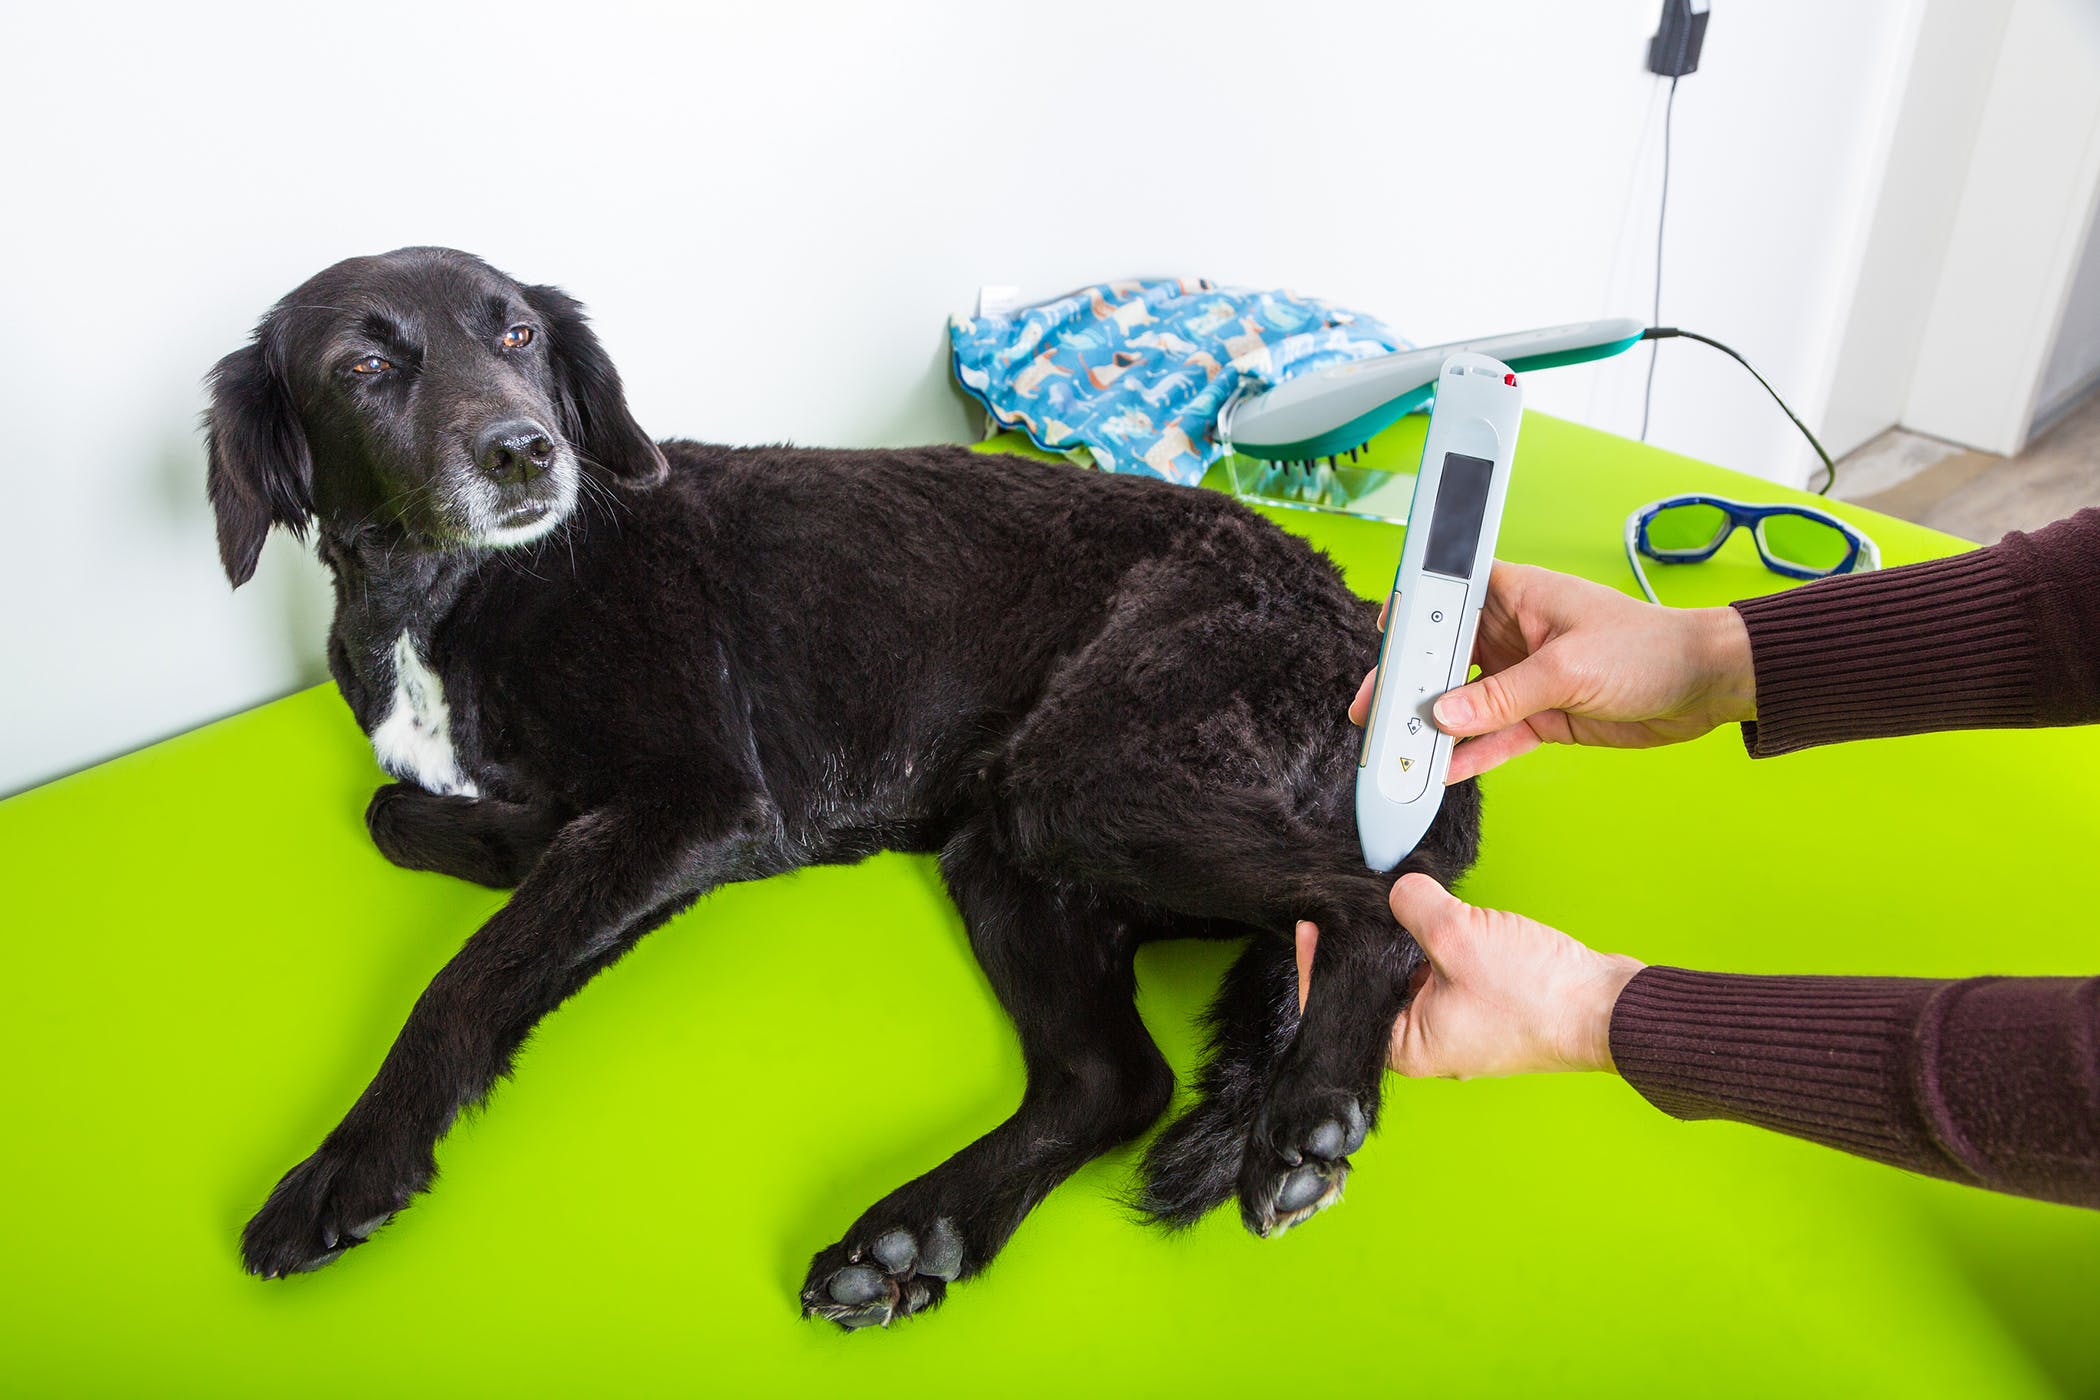 Which Is Most Effective For Dog Arthritis: Acupuncture Or Laser Treatments?